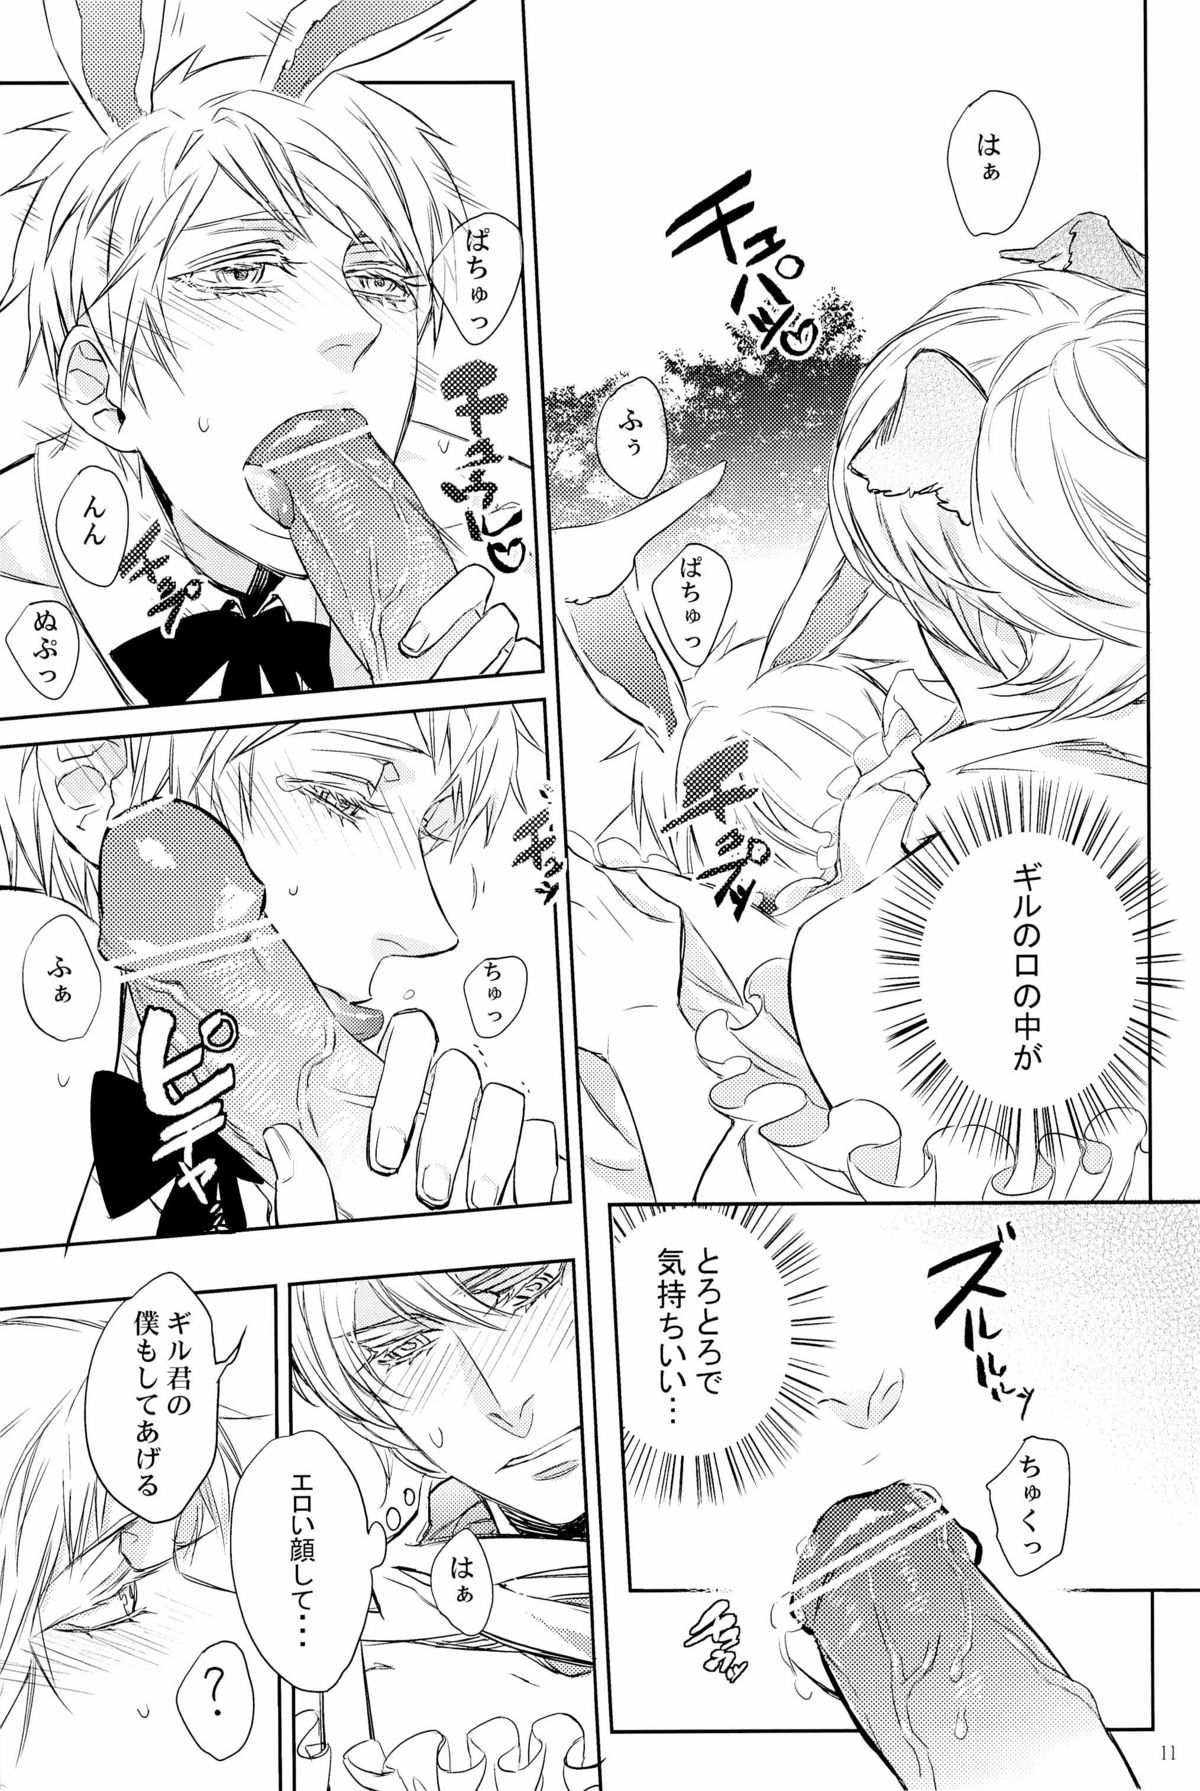 [Shout for Love (Bee)] Doddy Bunny (Hetalia) page 15 full